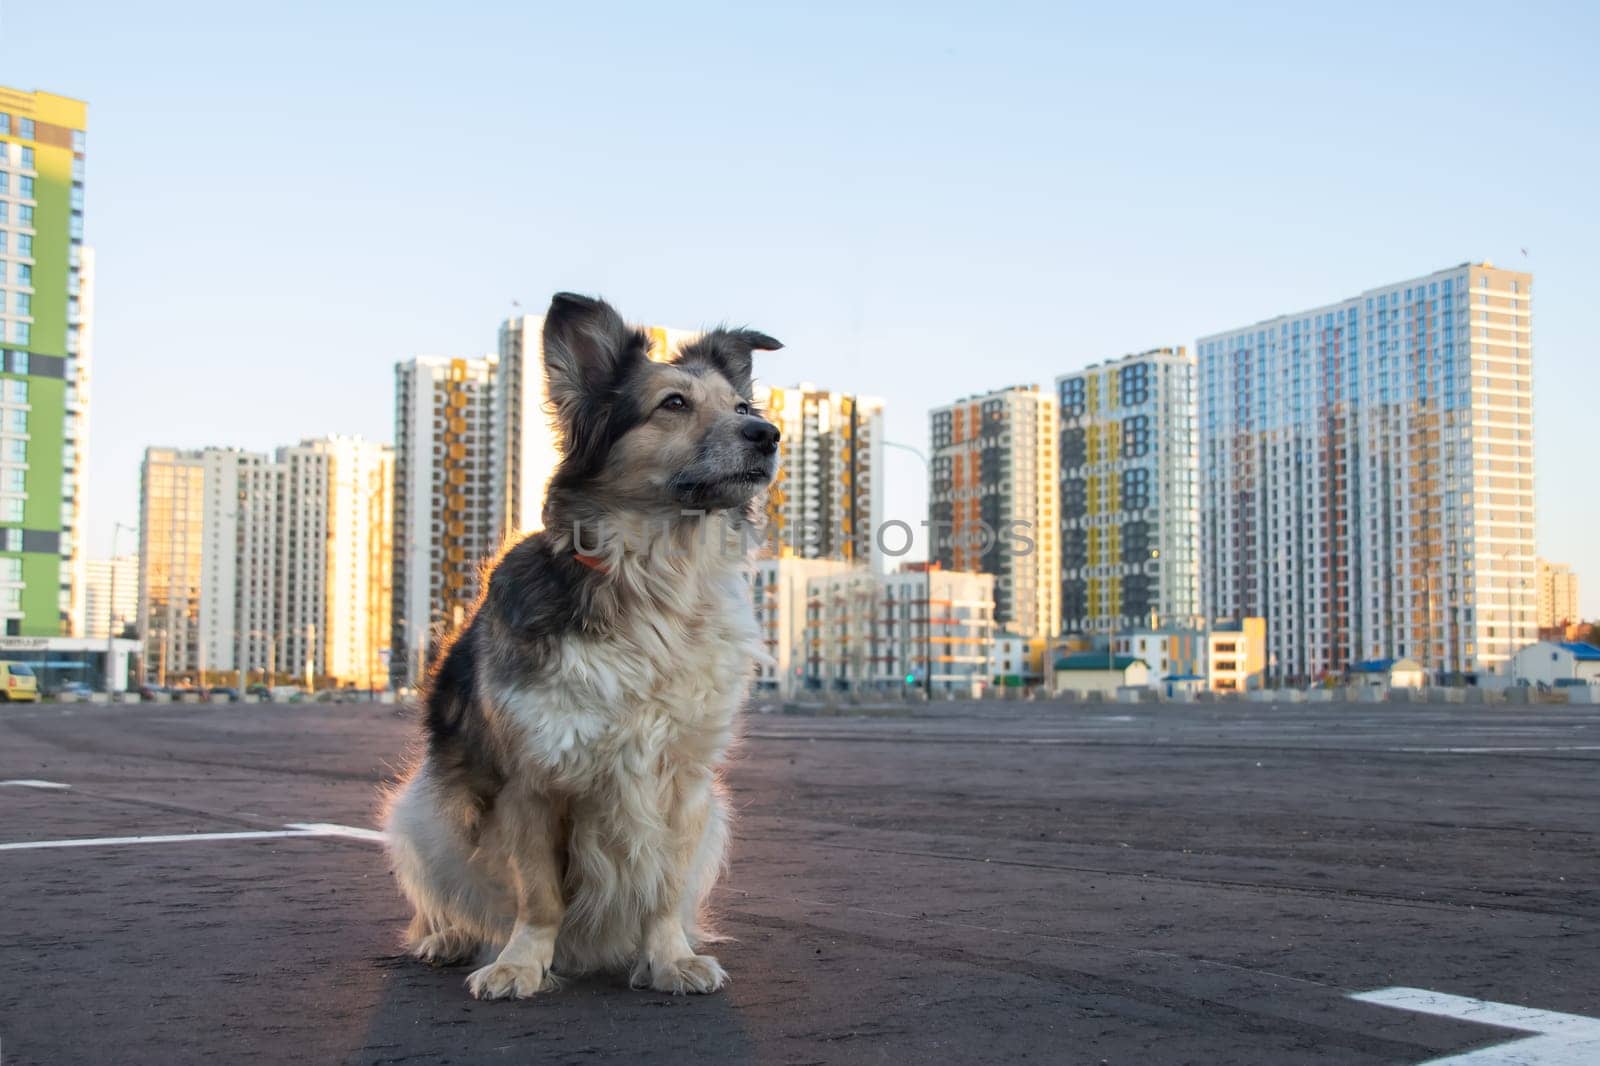 Fluffy dog sitting against the backdrop of modern tall buildings